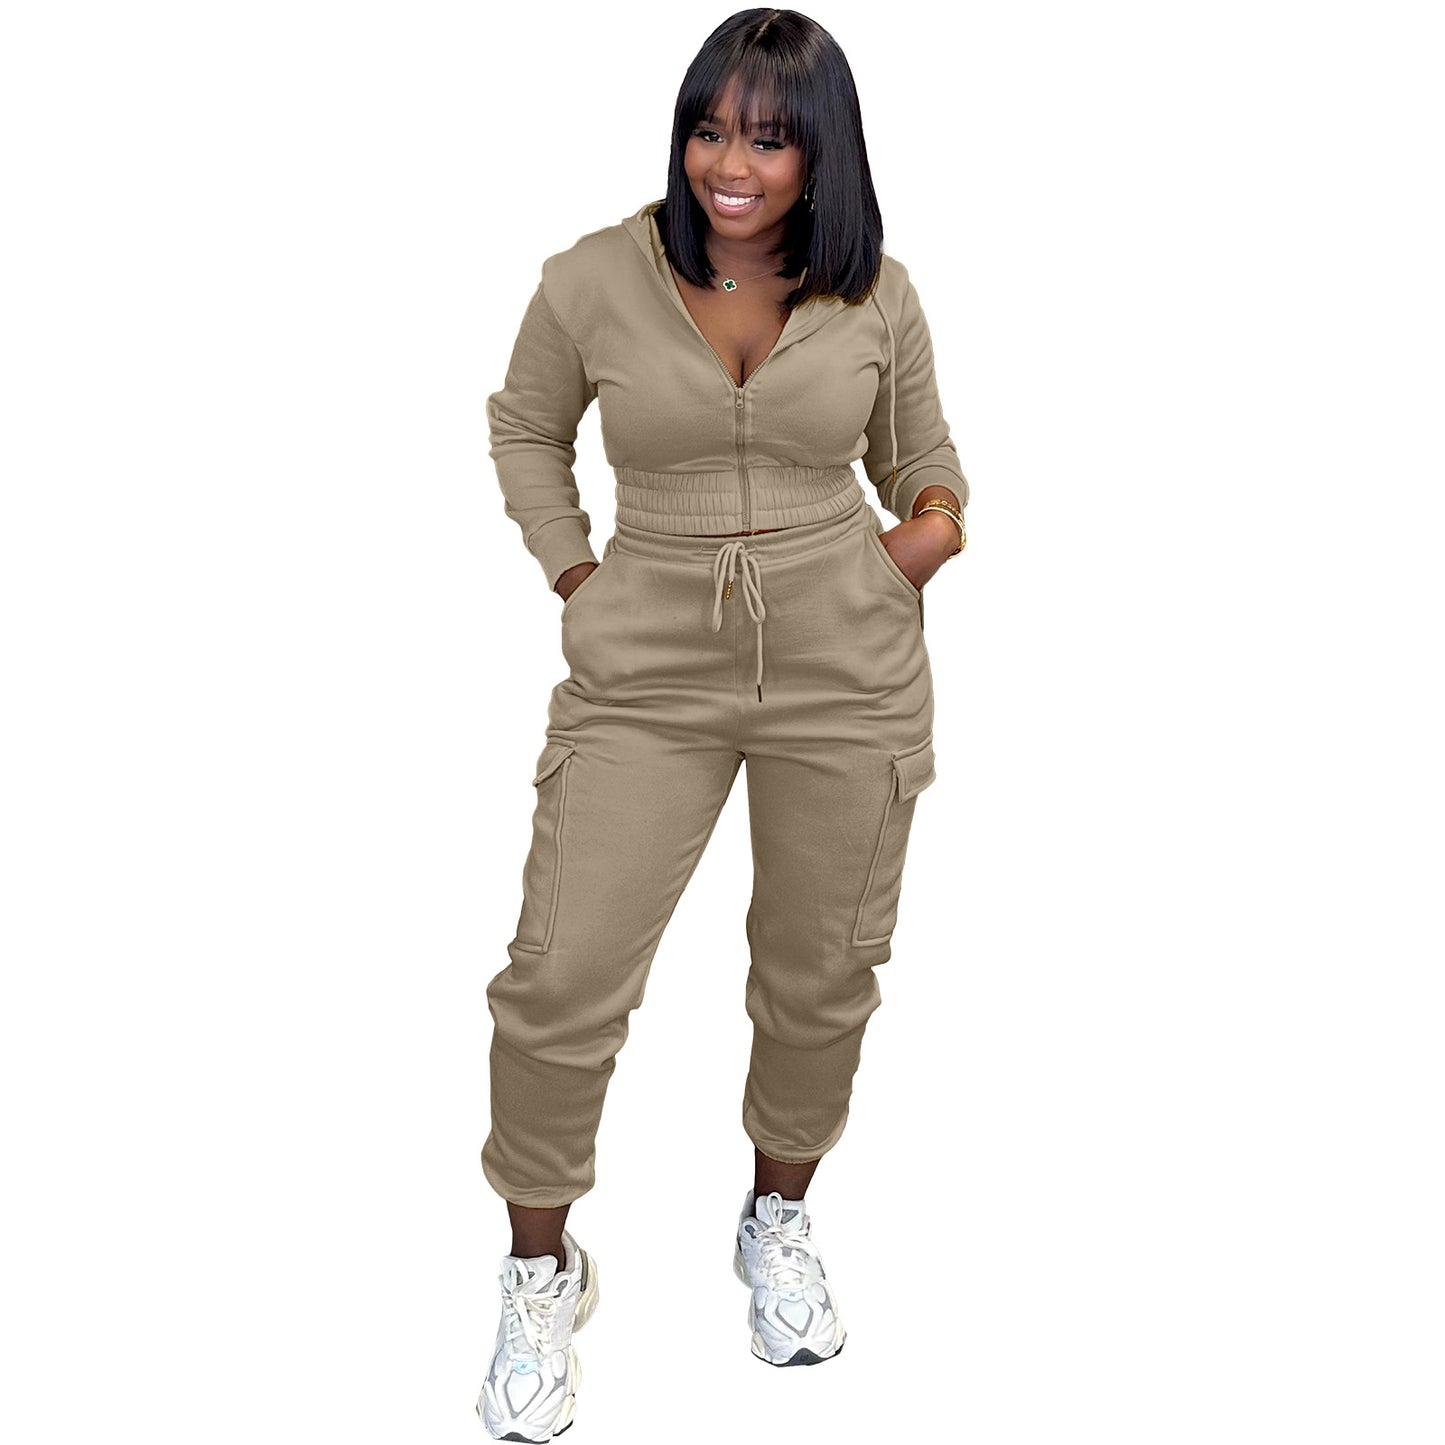 BamBam Women's Patchwork Fleece Casual Sports Hooded Two-Piece Tracksuit Set - BamBam